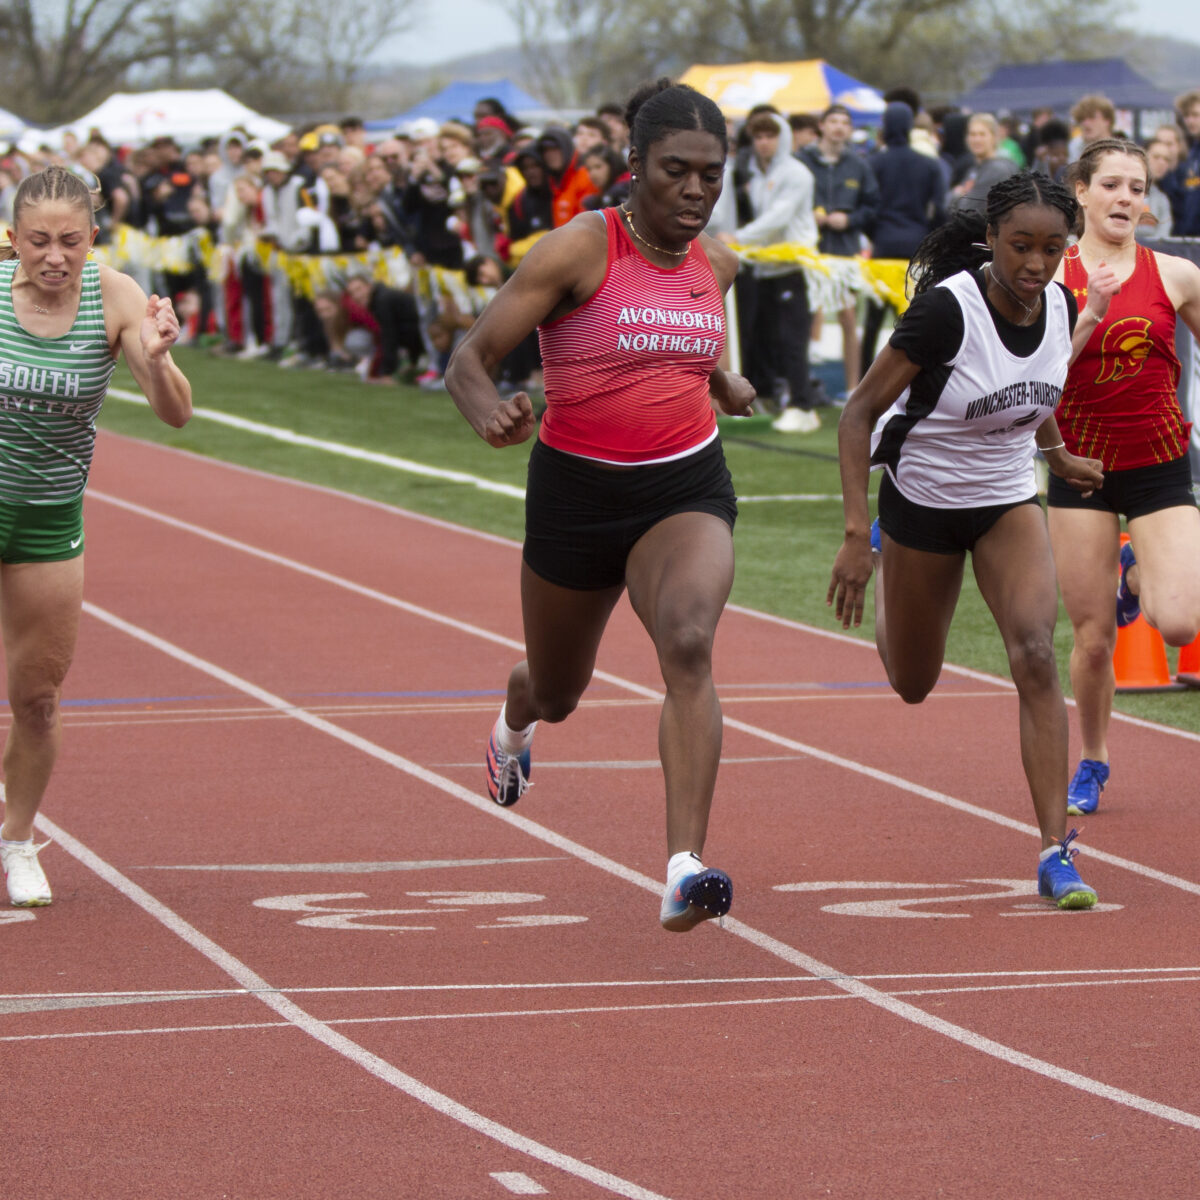 ‘All Robinsons are fast’: Avonworth senior and Pitt recruit Hayzes Robinson continues family’s sister act of champion sprinters